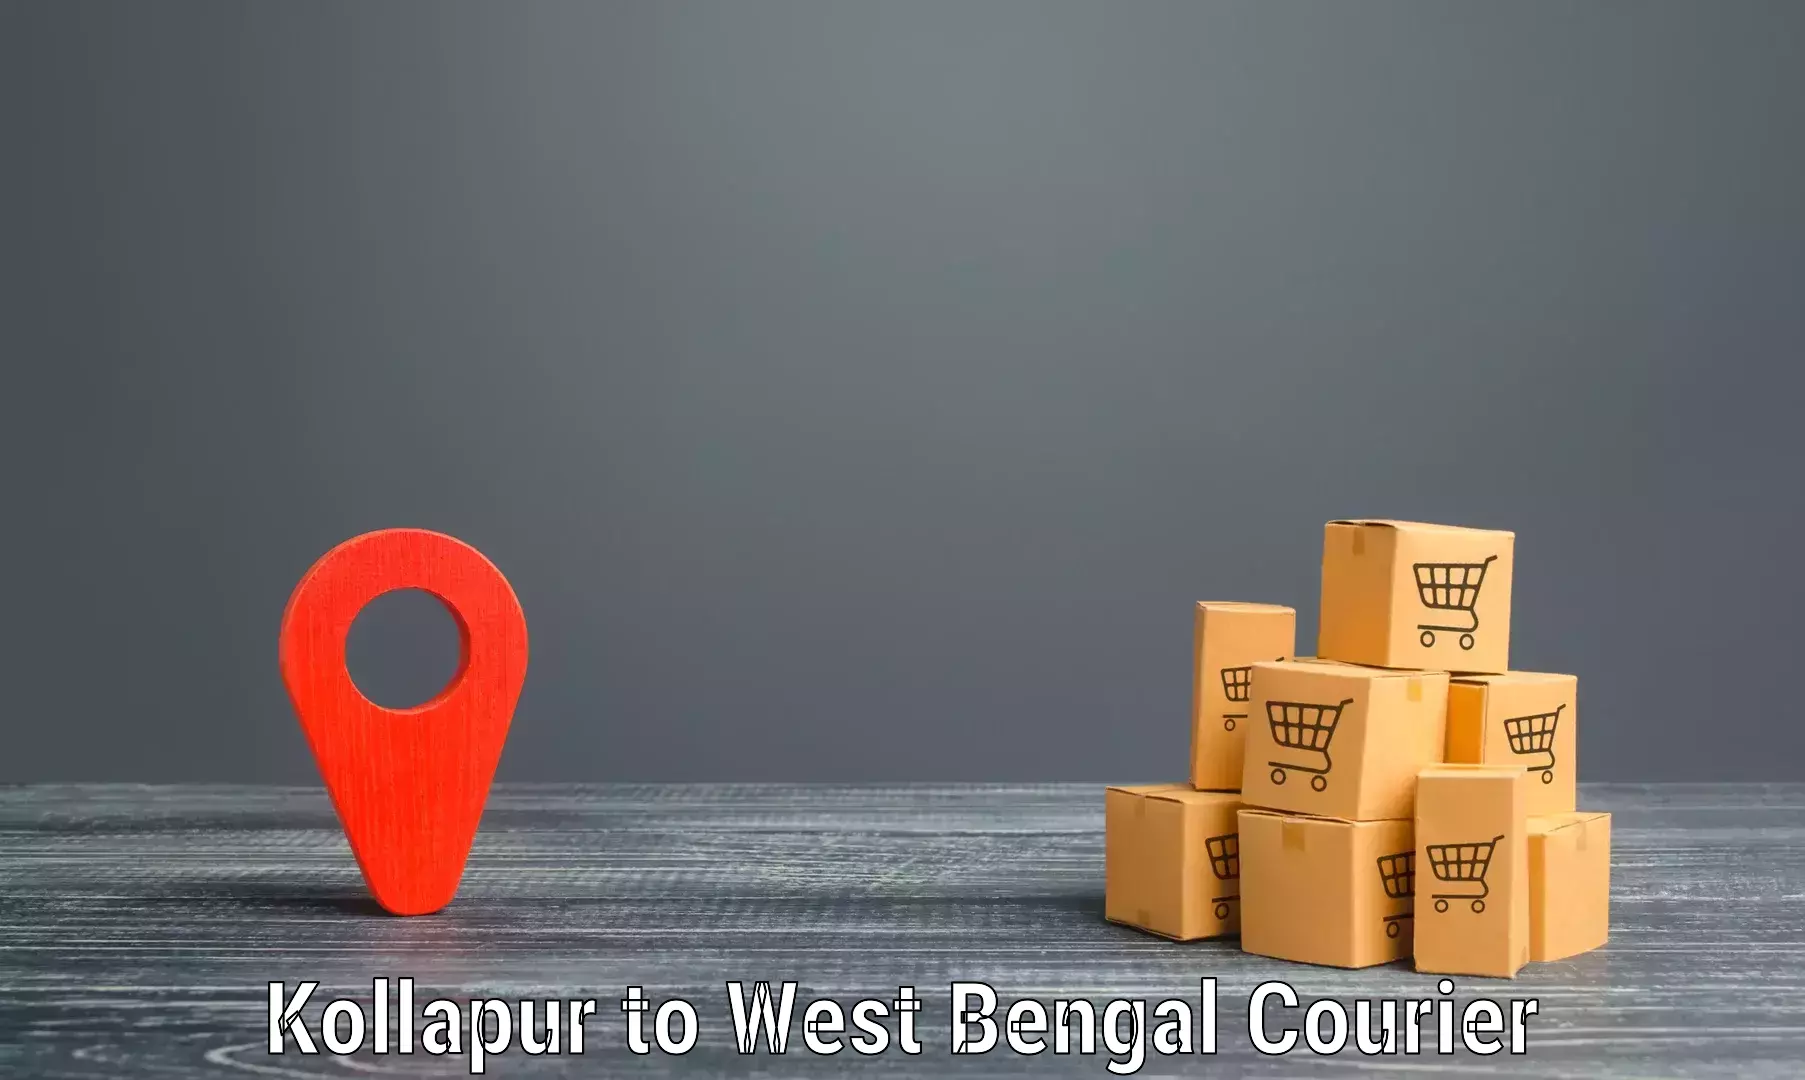 Nationwide parcel services Kollapur to Ennore